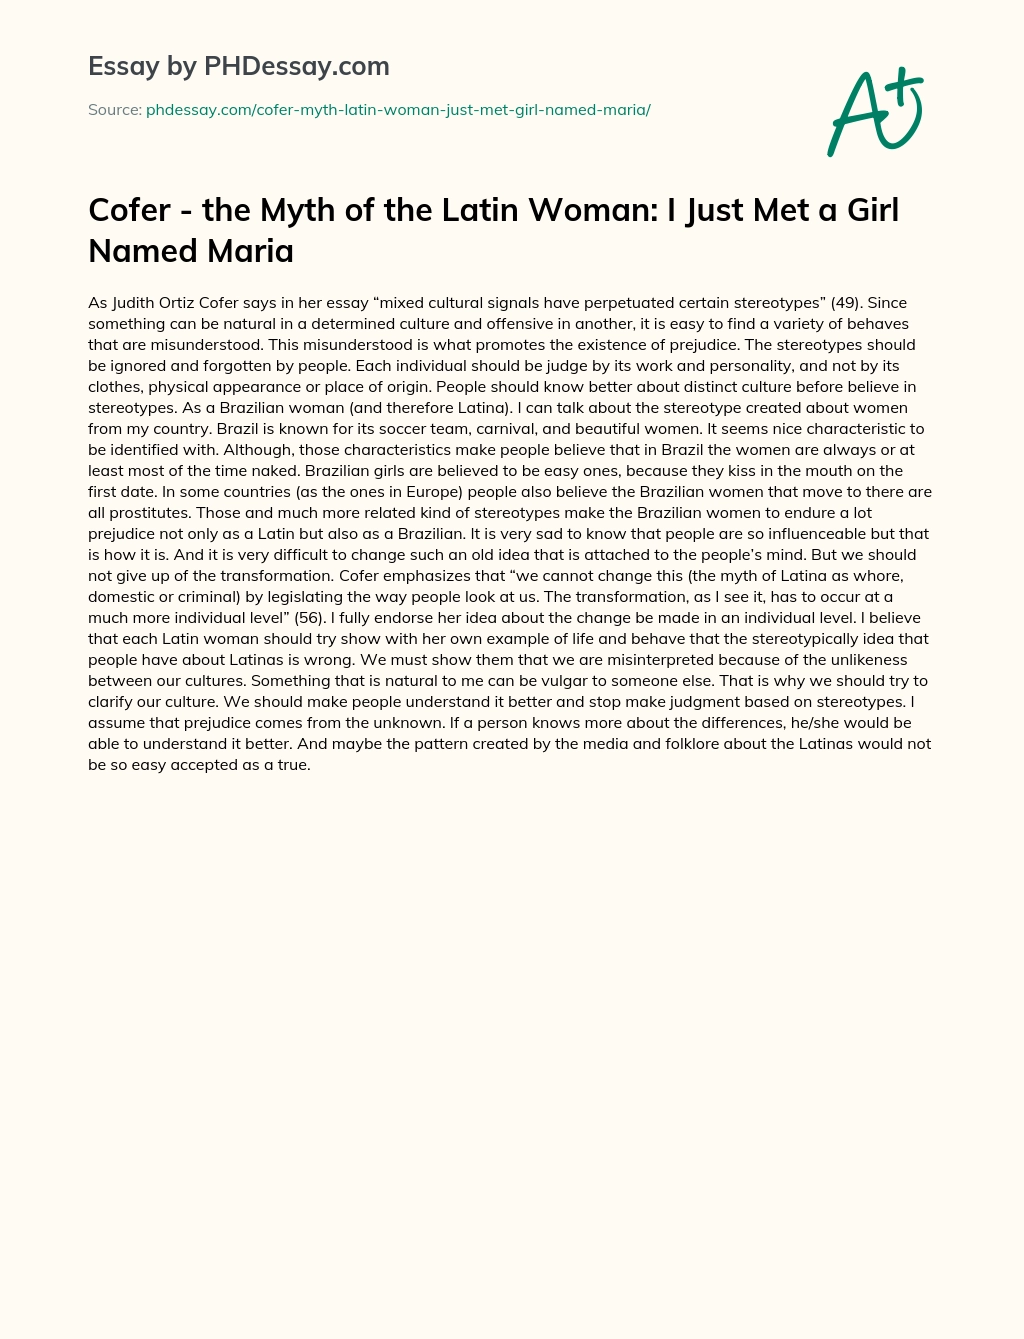 Cofer – the Myth of the Latin Woman: I Just Met a Girl Named Maria essay